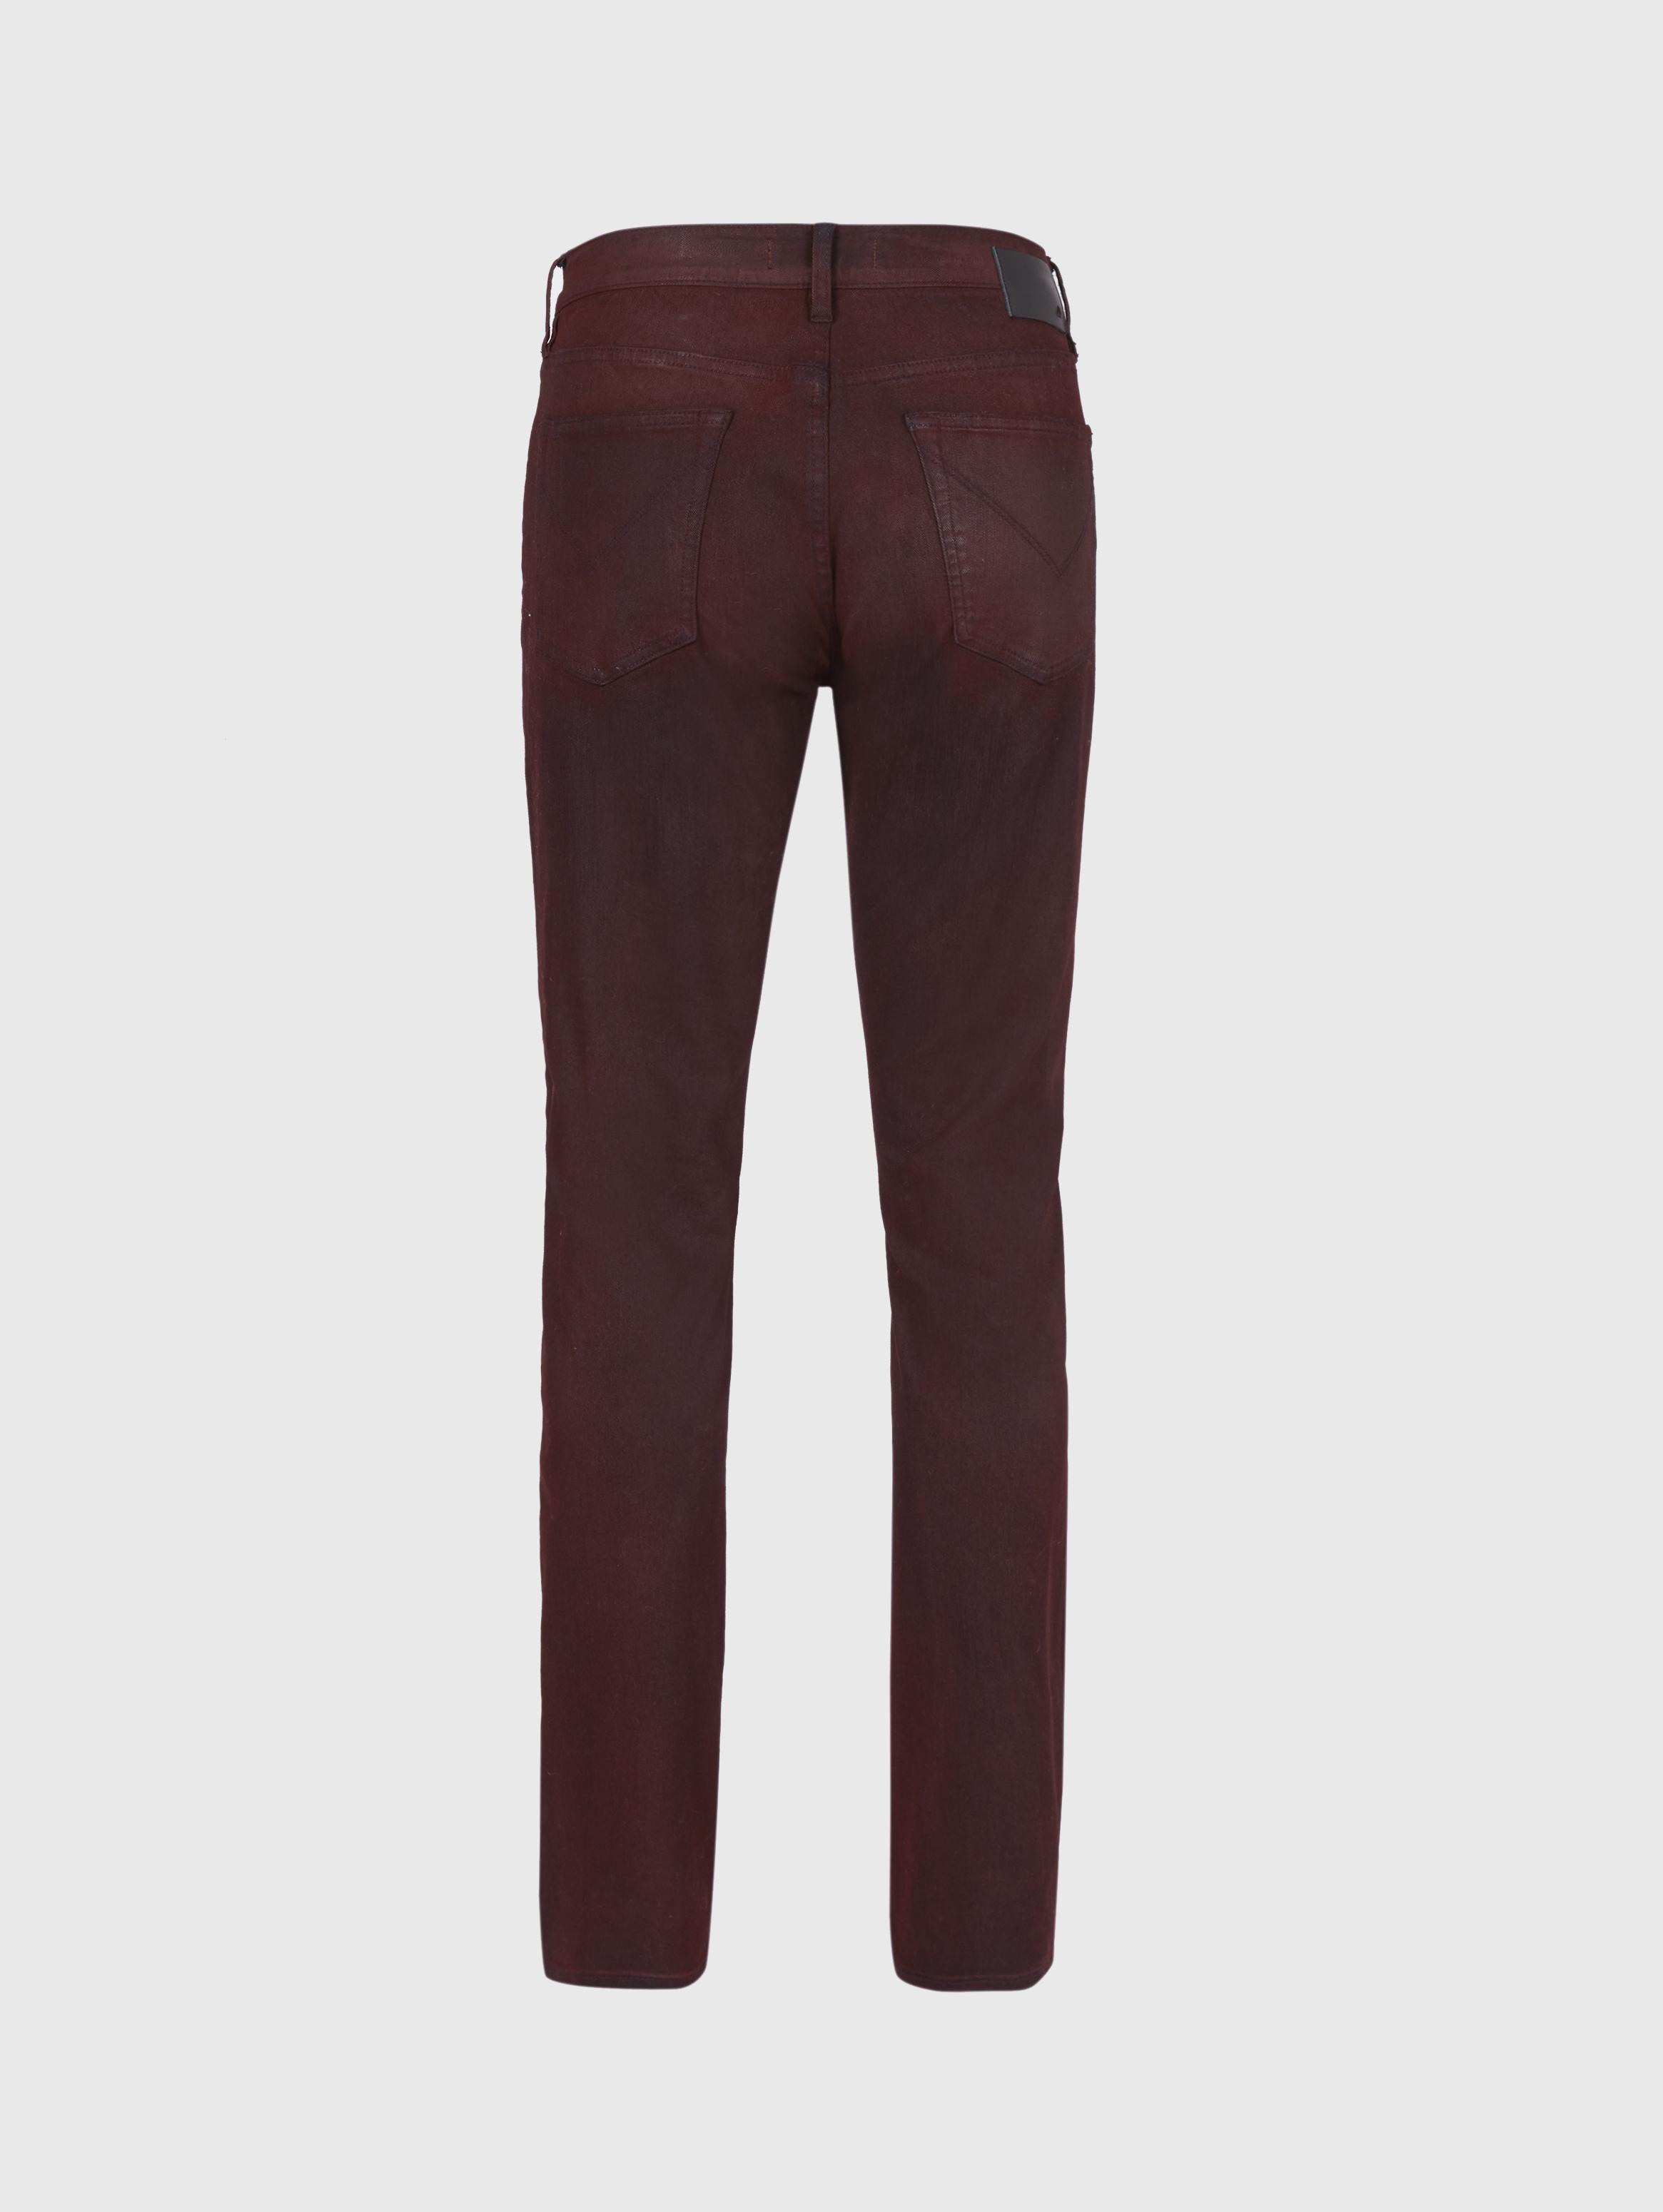 WIGHT SKINNY STRAIGHT FIT JEAN - GREGORY WASH image number 4